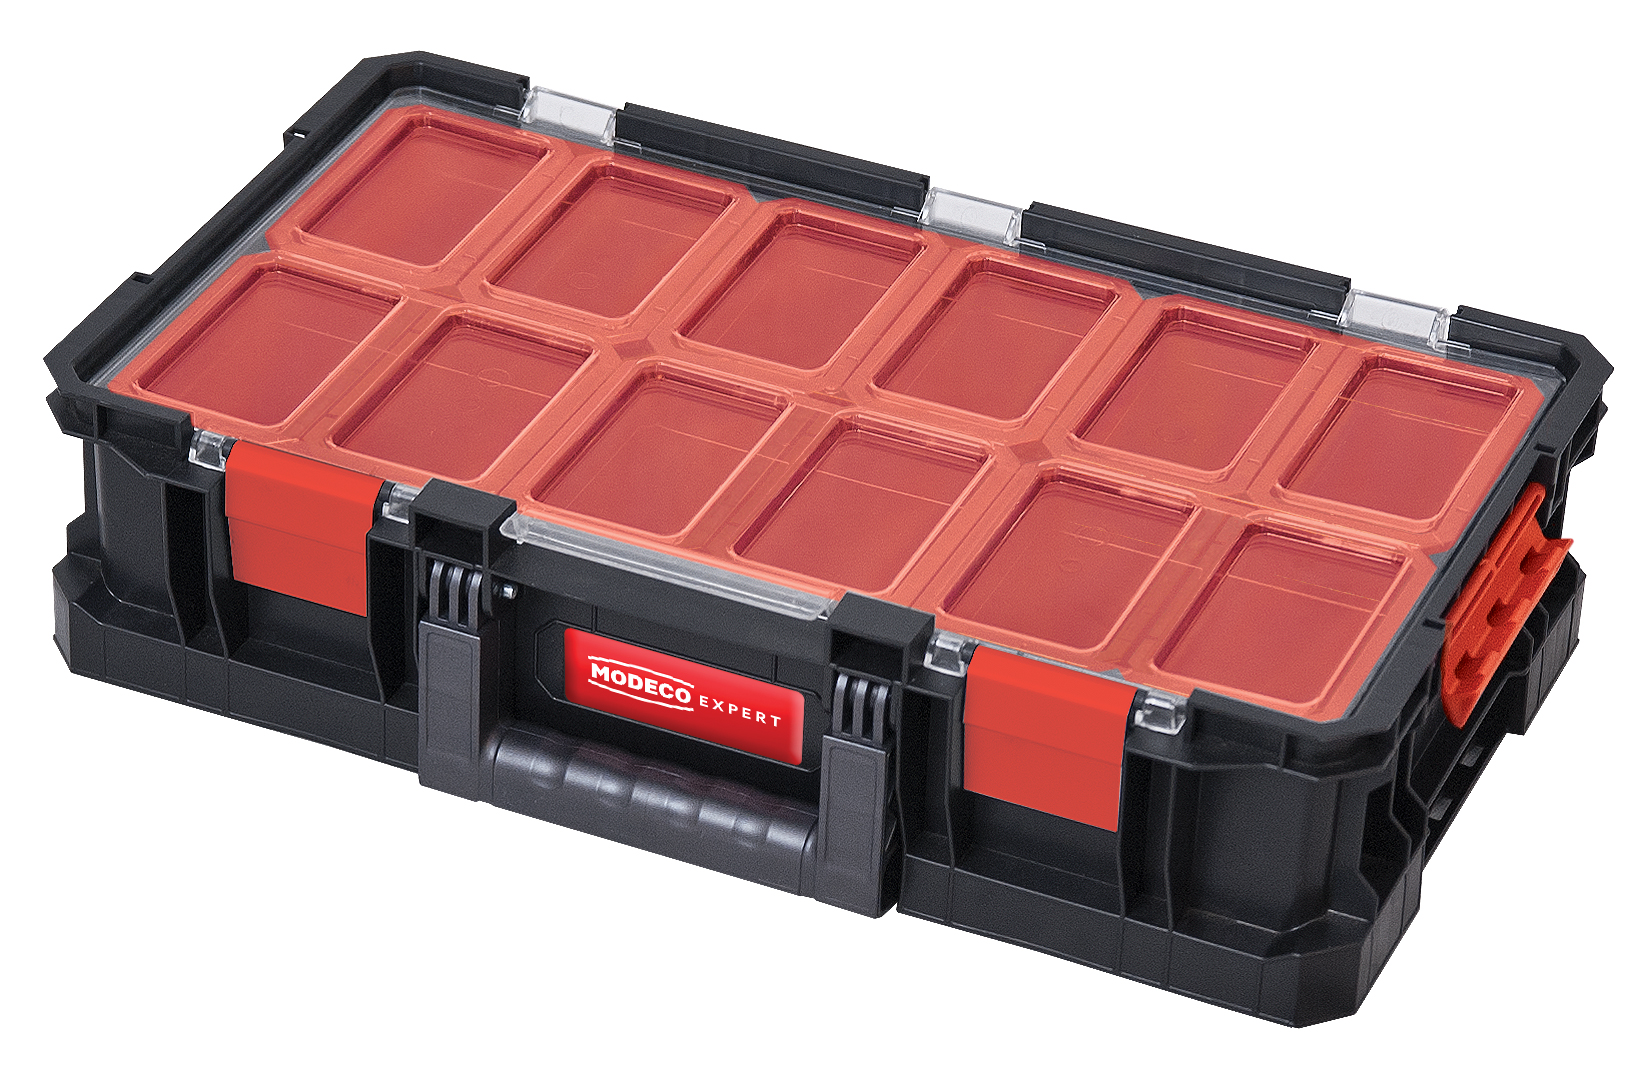 MN-03-170 Multi Storage System, organizer, 9 containers